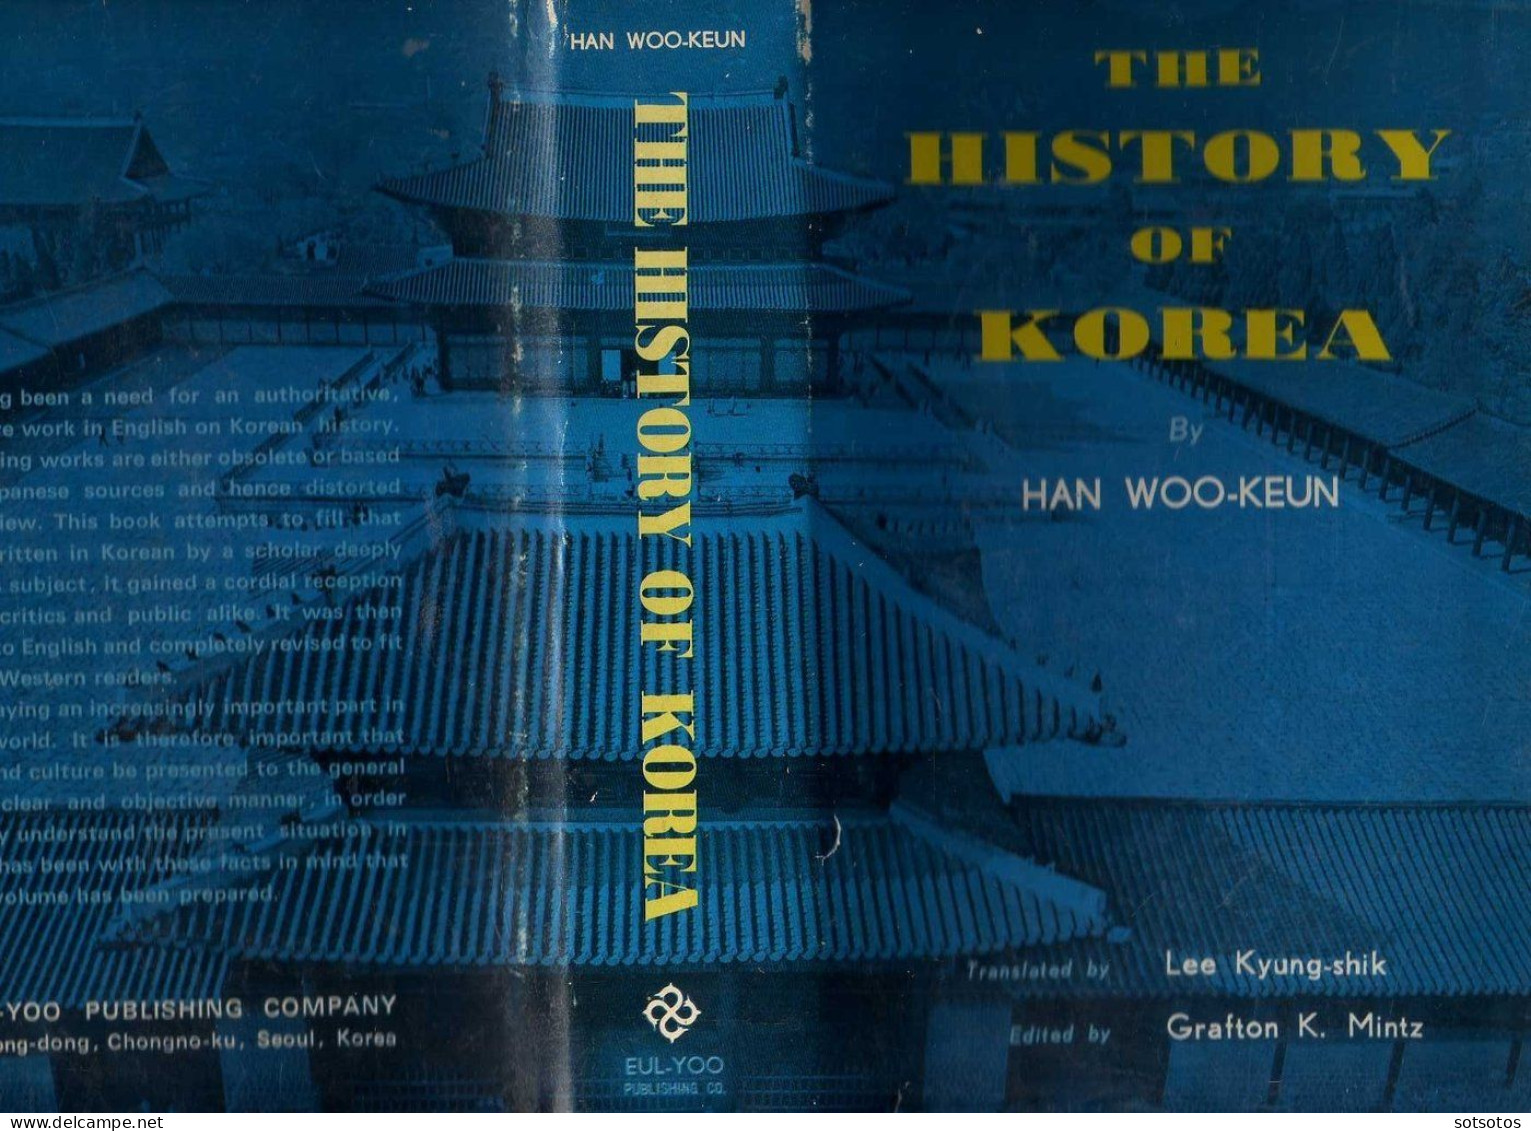 The History of KOREA by Han WOO-KEUN, Ed. Gr. MINTZ (1972), 552 pgs (16Χ23,50 cent) - IN VERY GOOD CONDITION